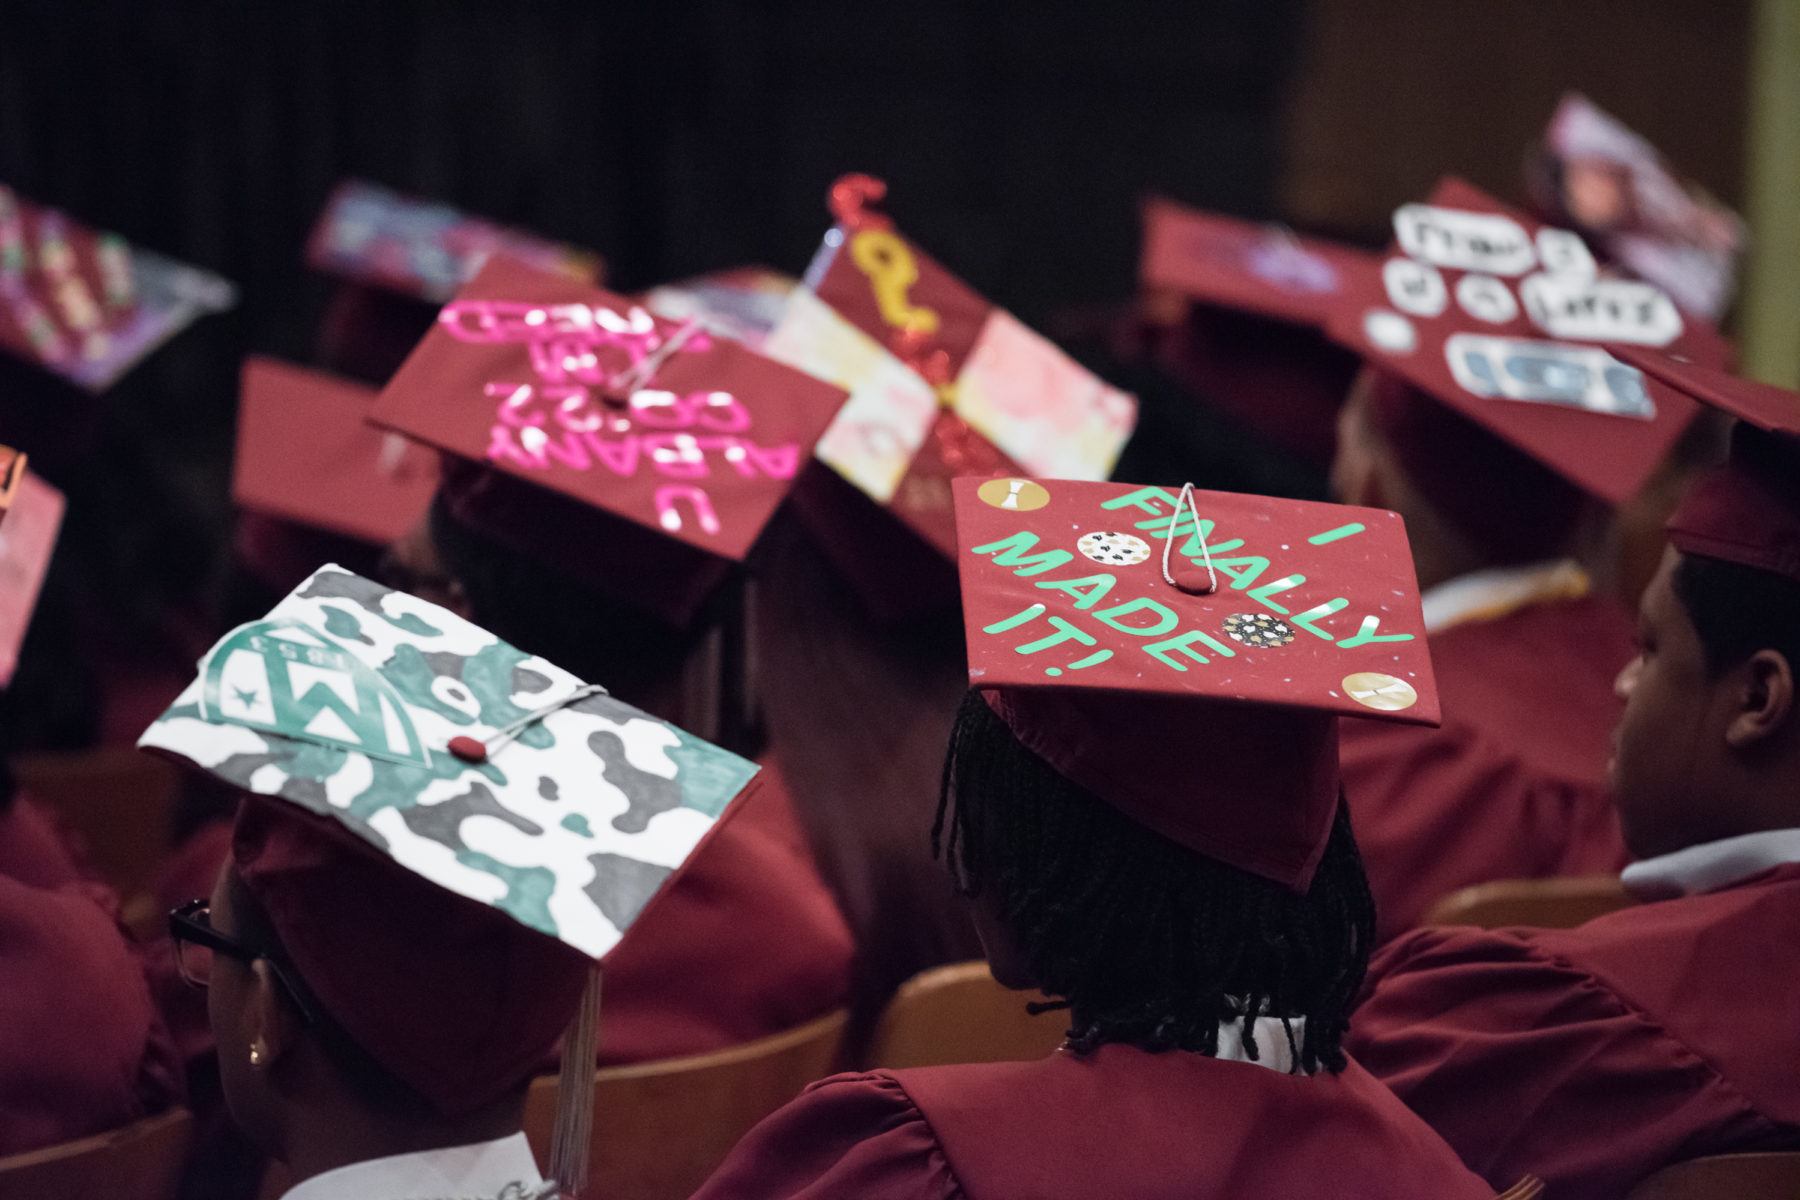 Students wearing graduation caps with one decorated to say "I finally made it!"